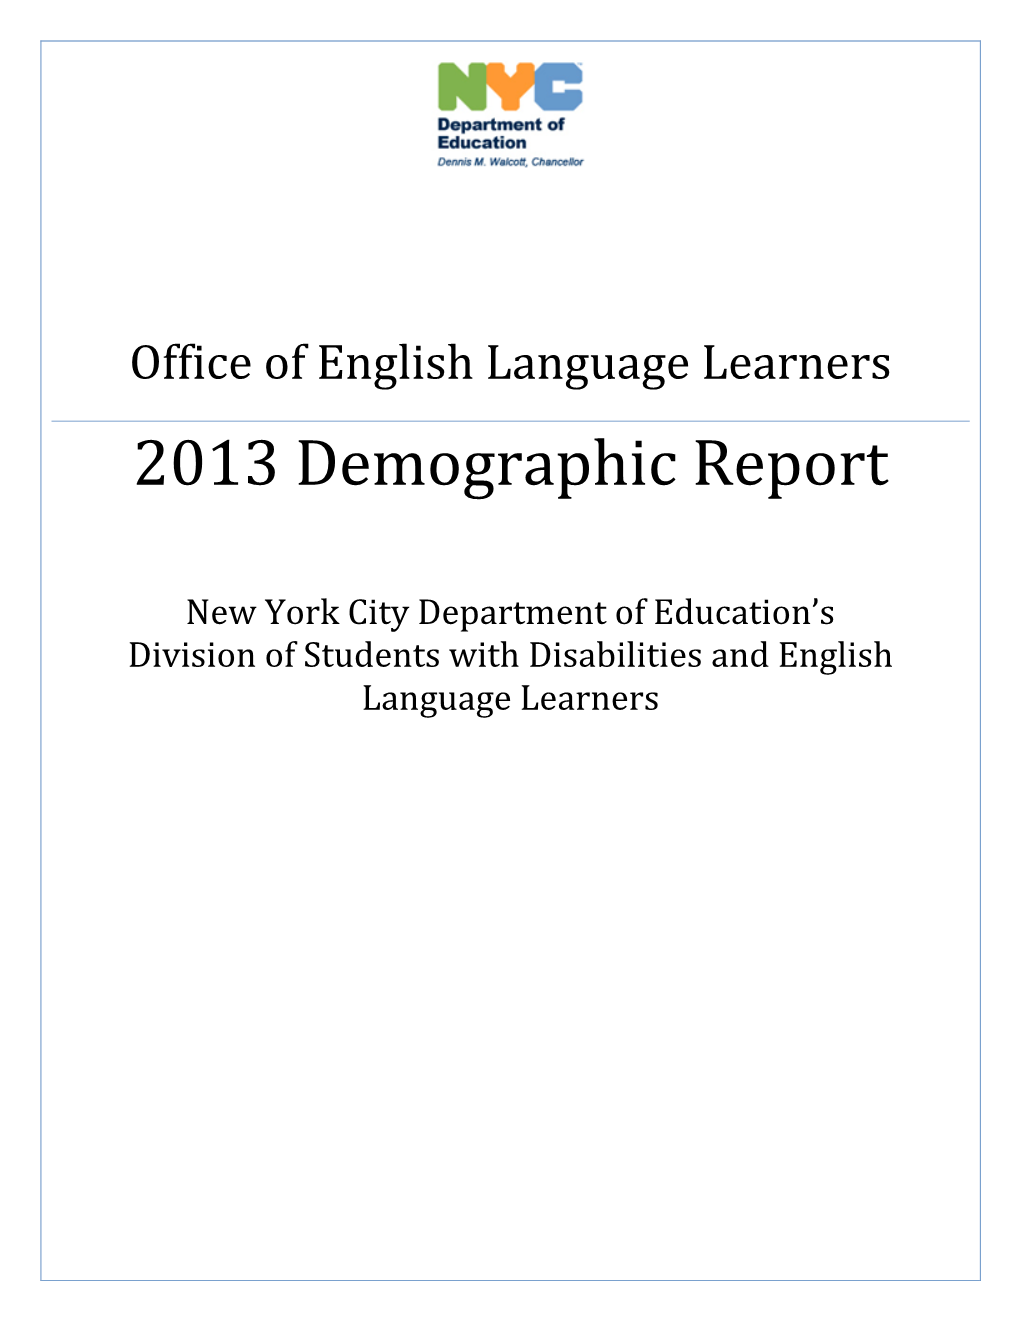 Office of English Language Learners: 2013 Demographic Report